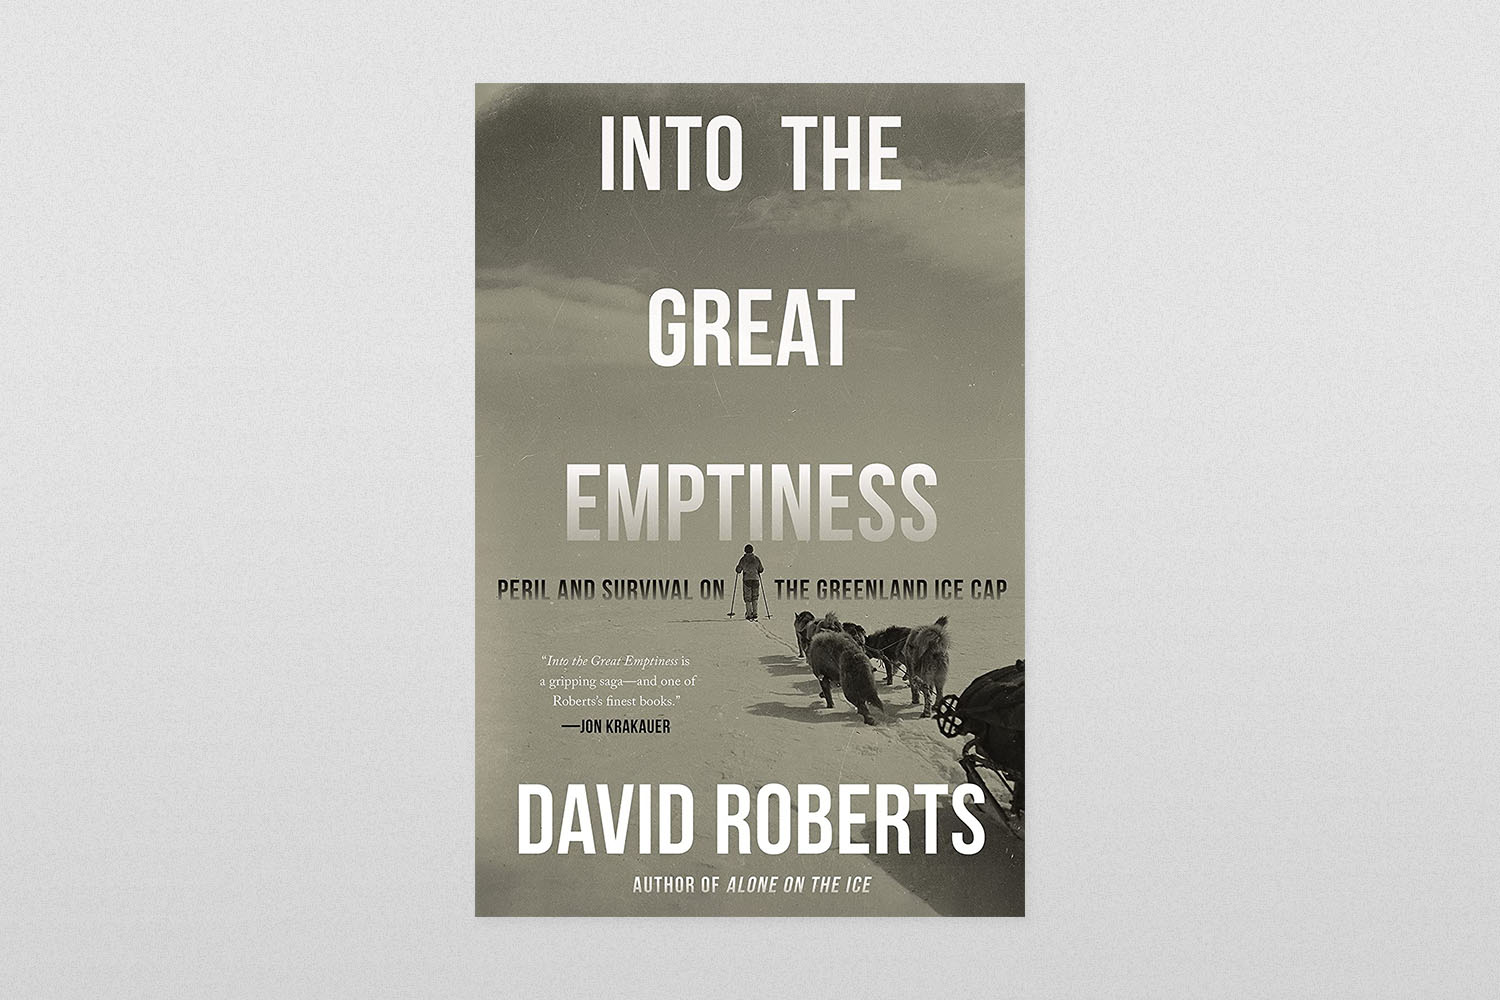 Into the Great Emptiness by David Roberts